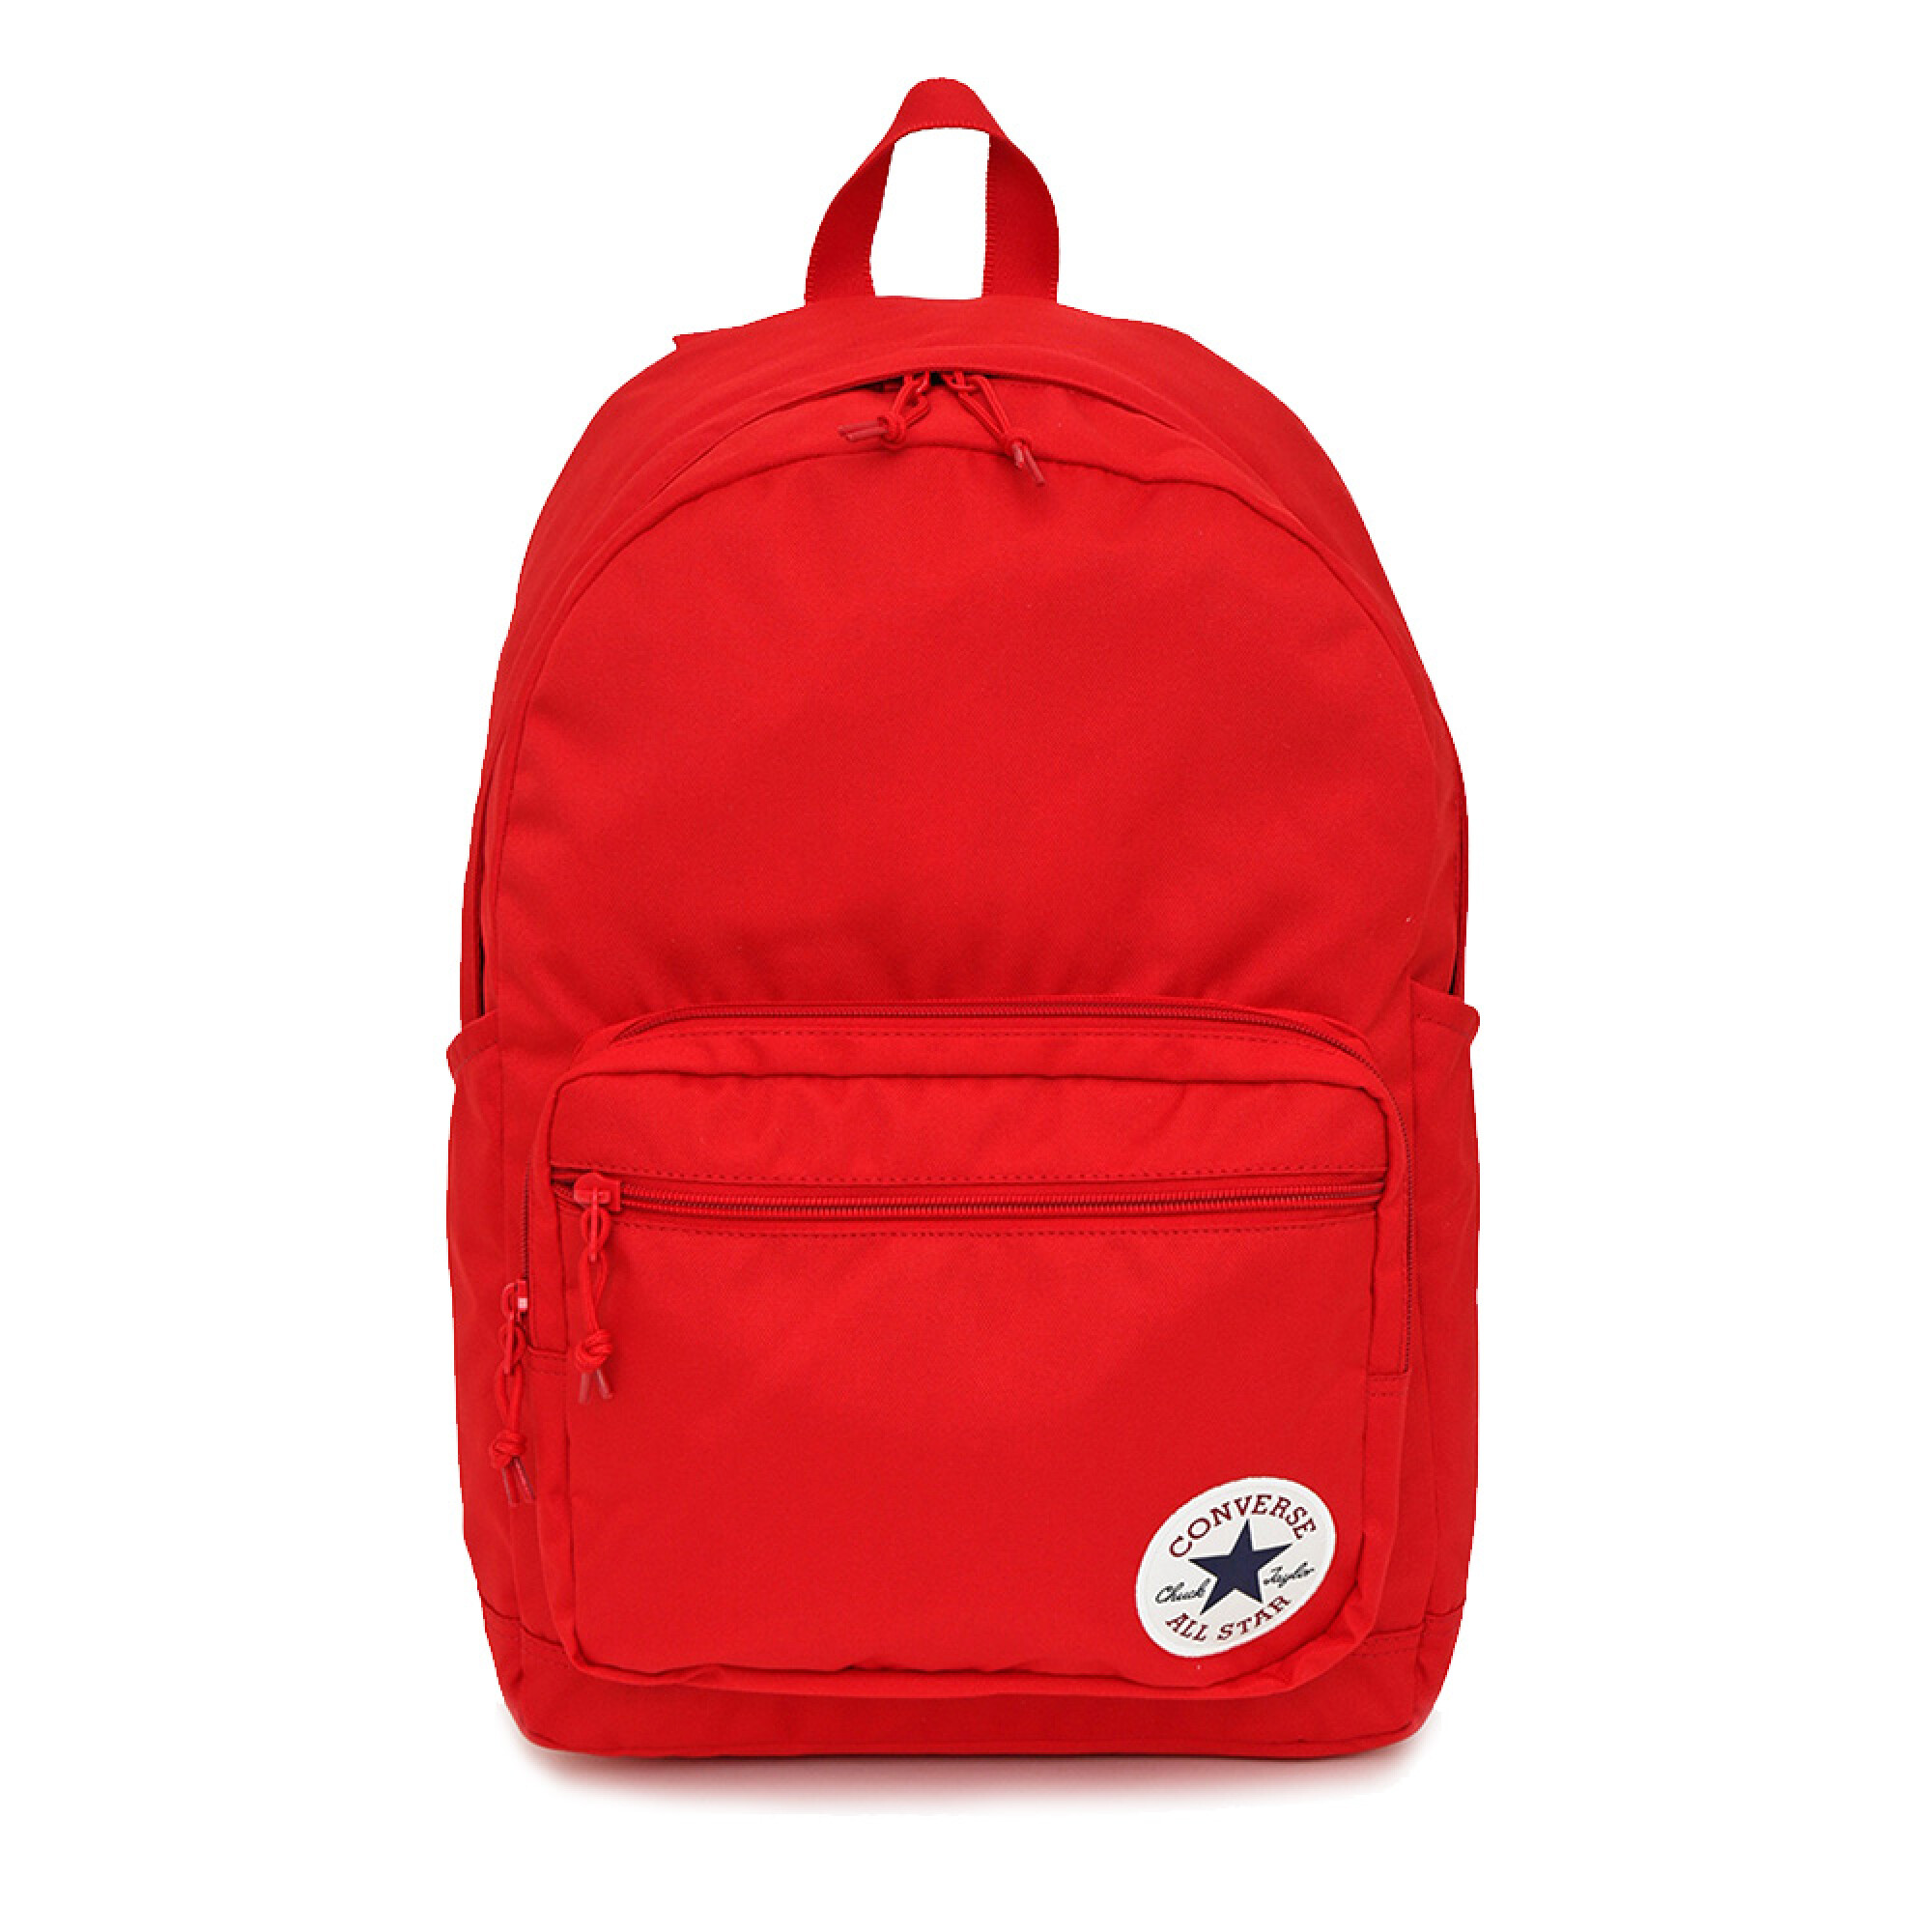 STRAIGHT EDGE BACKPACK CONVERSE — Store